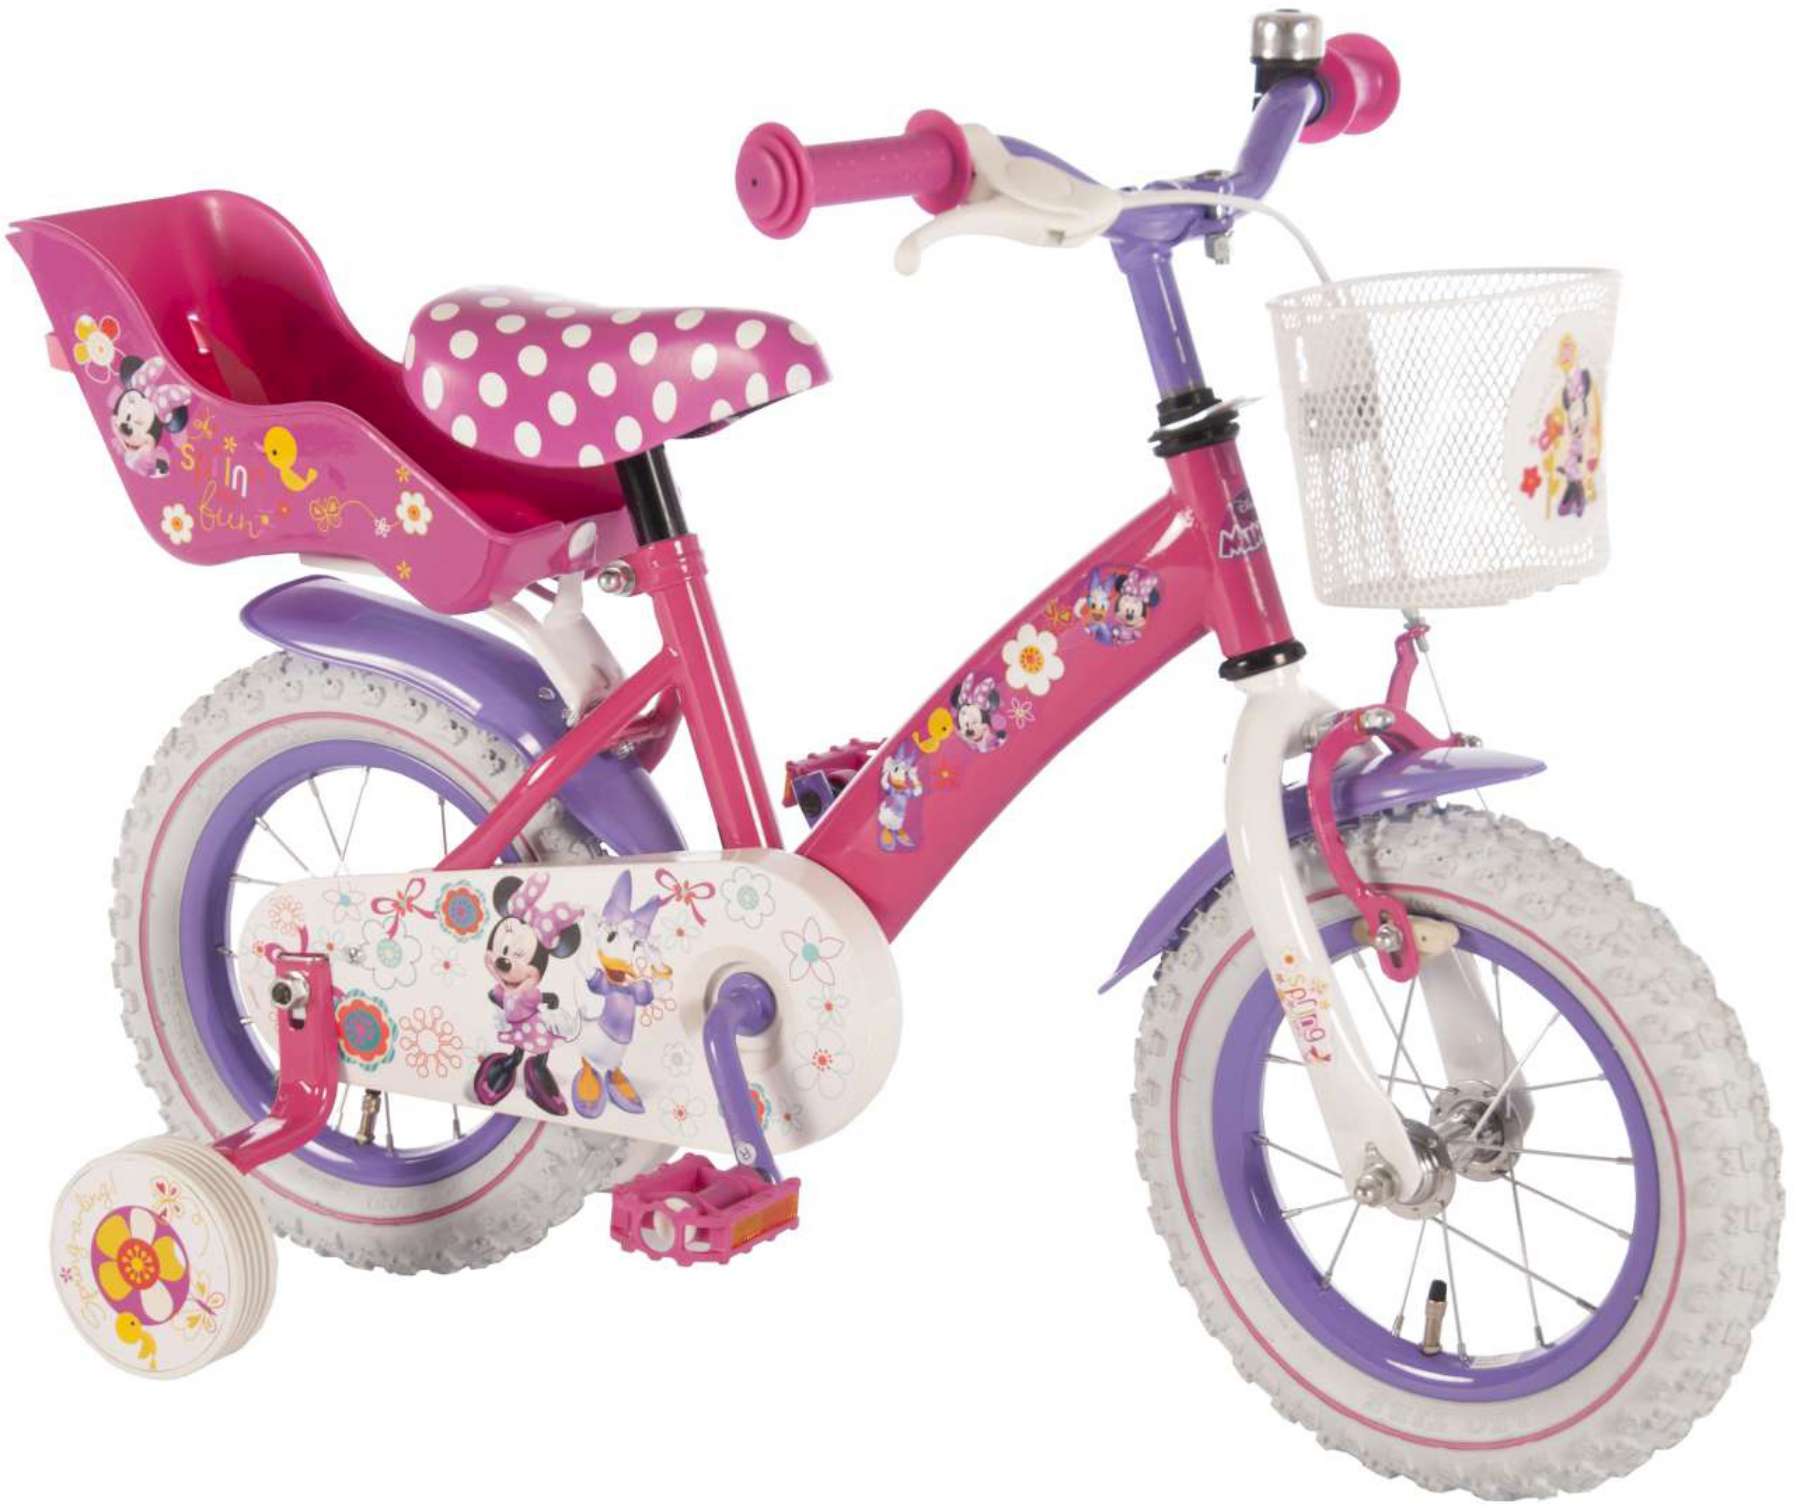 Disney Minnie Mouse BowTique 12 inch girls bicycle